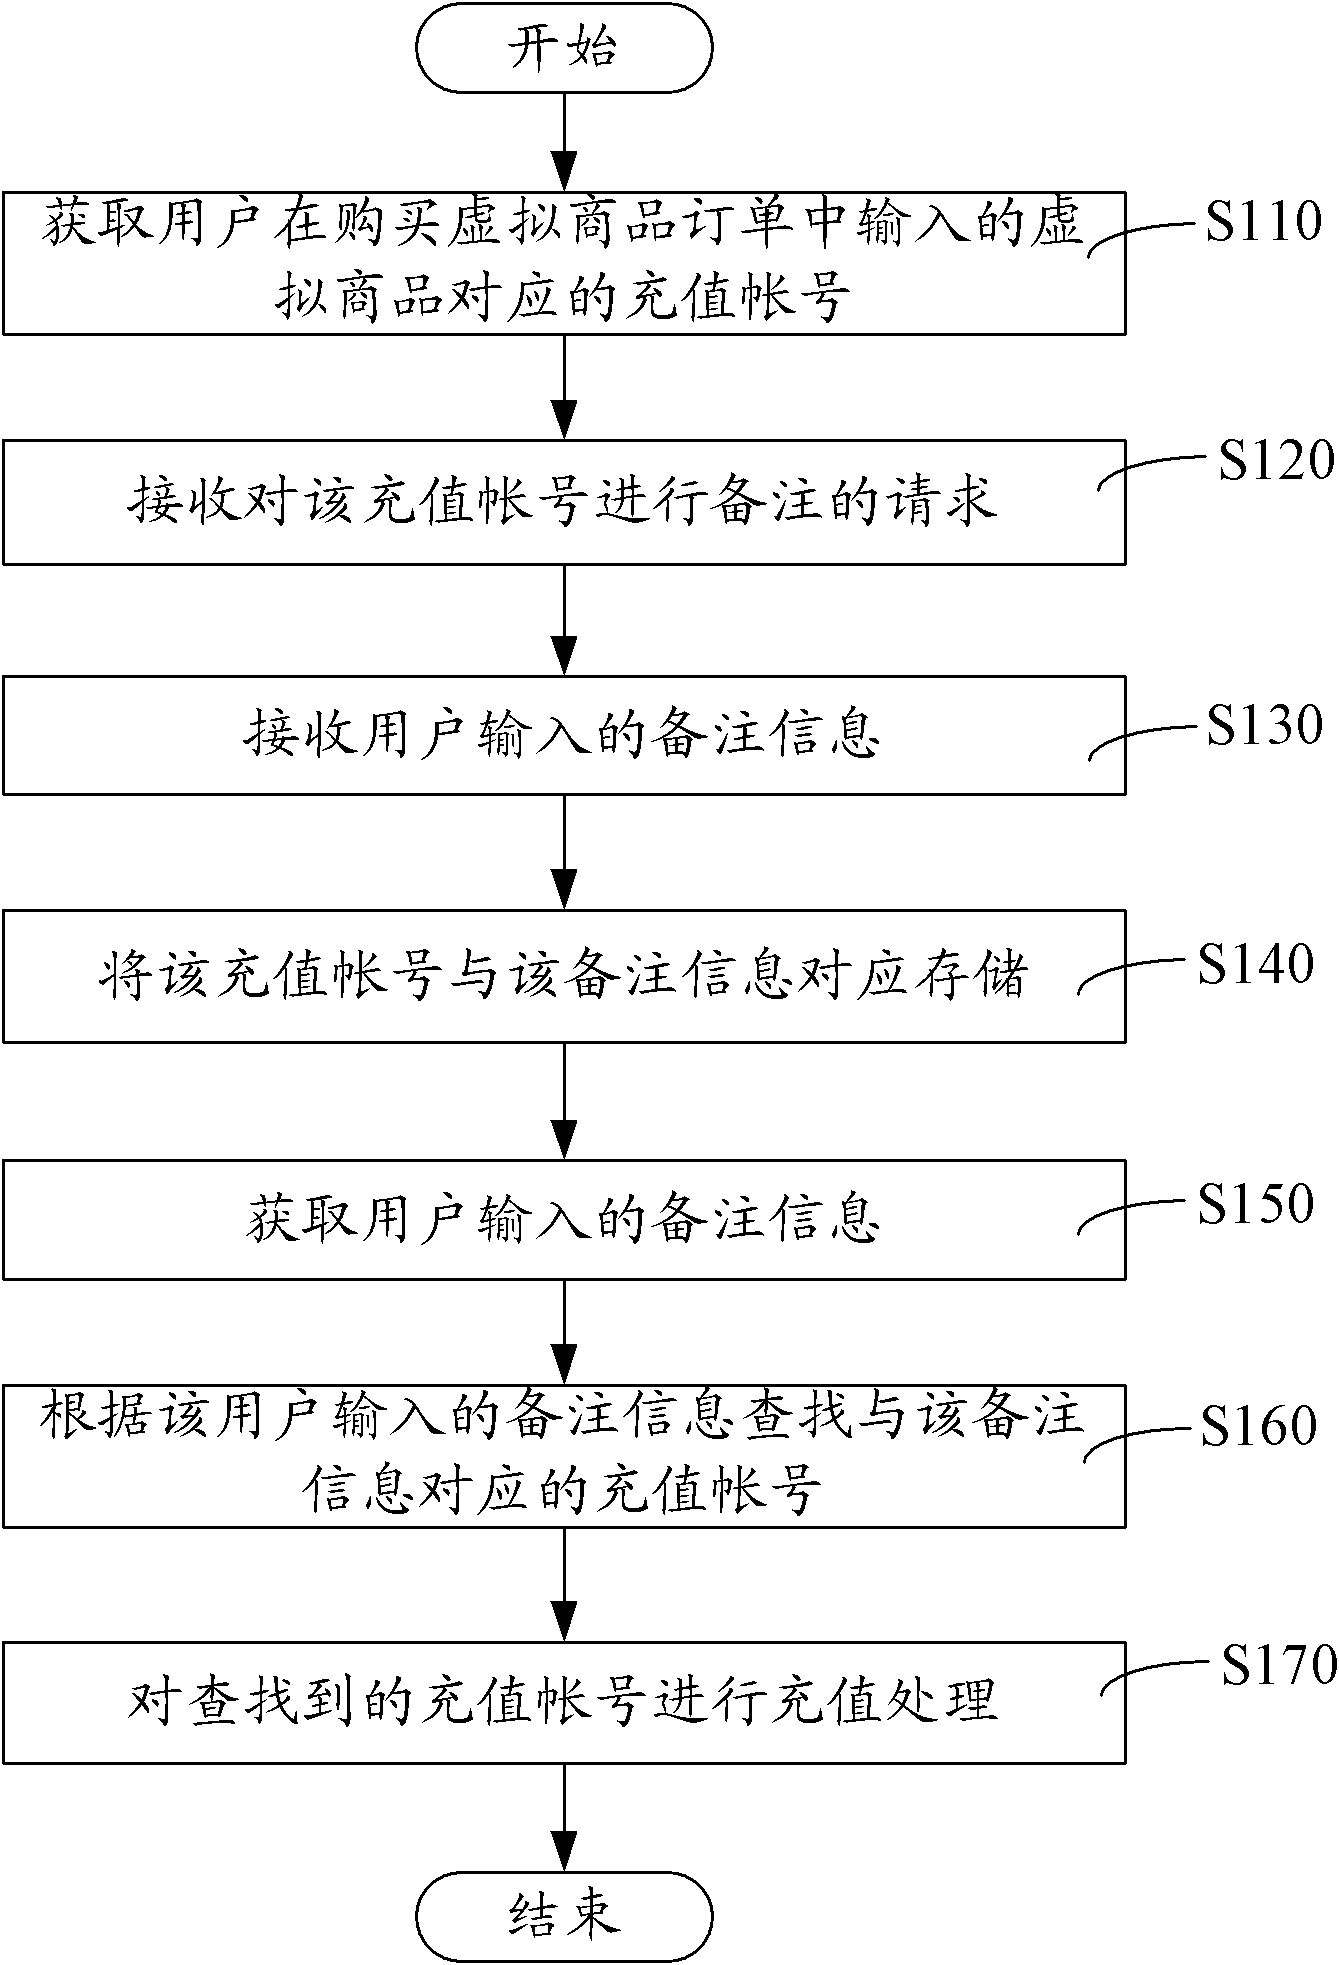 Method and system for virtual goods order comments